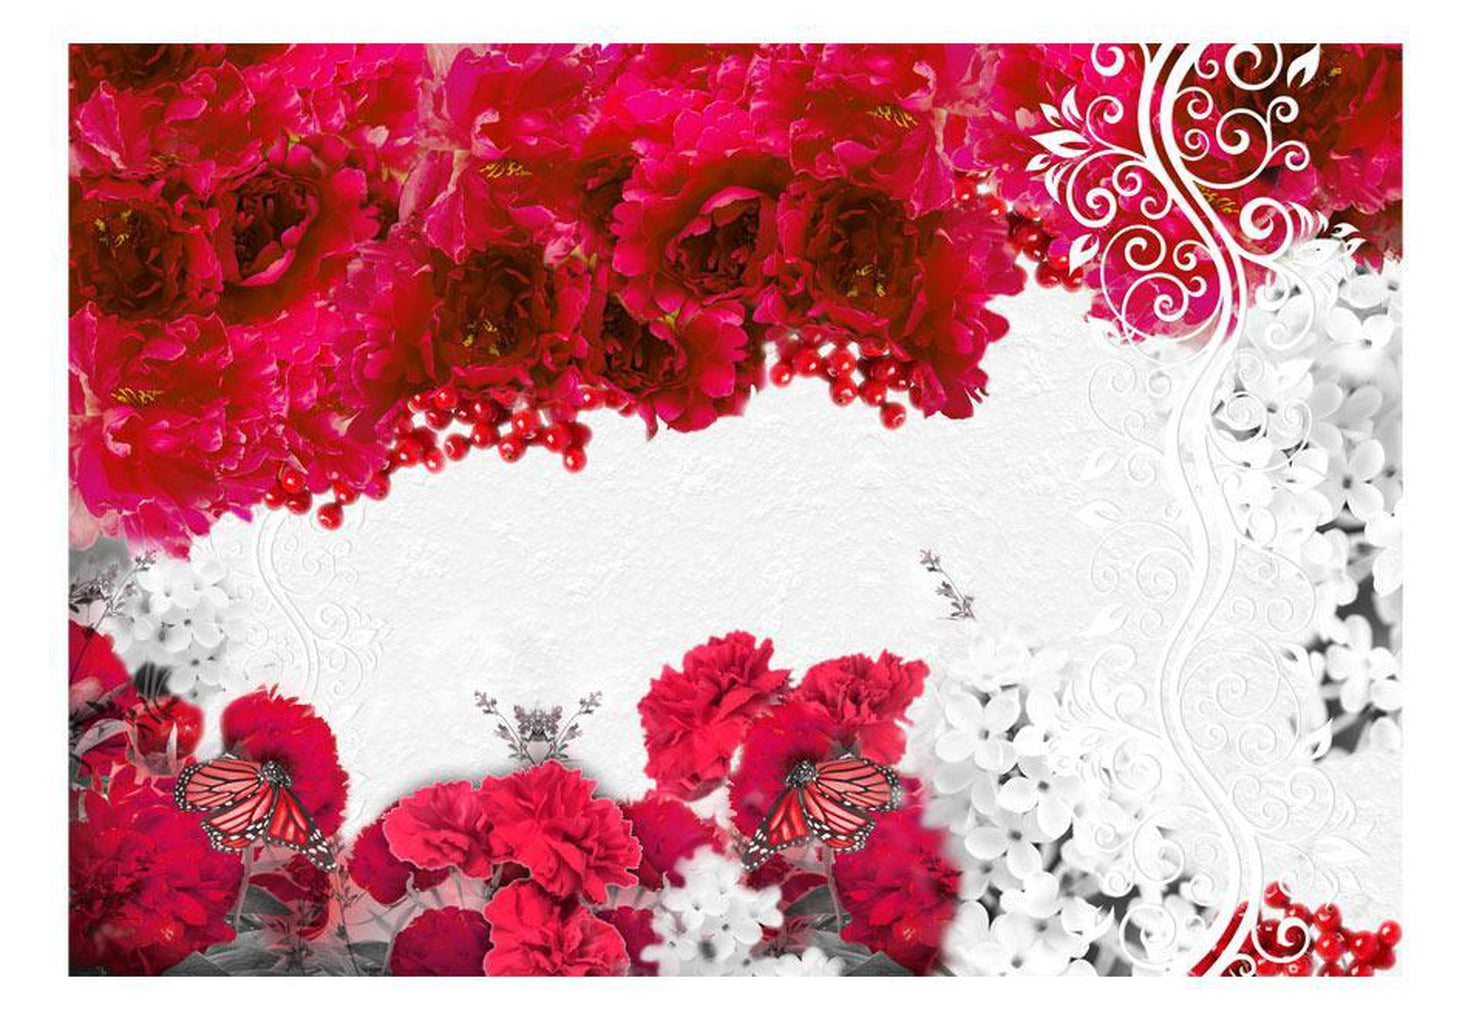 Wall mural - Colors of spring: red-TipTopHomeDecor